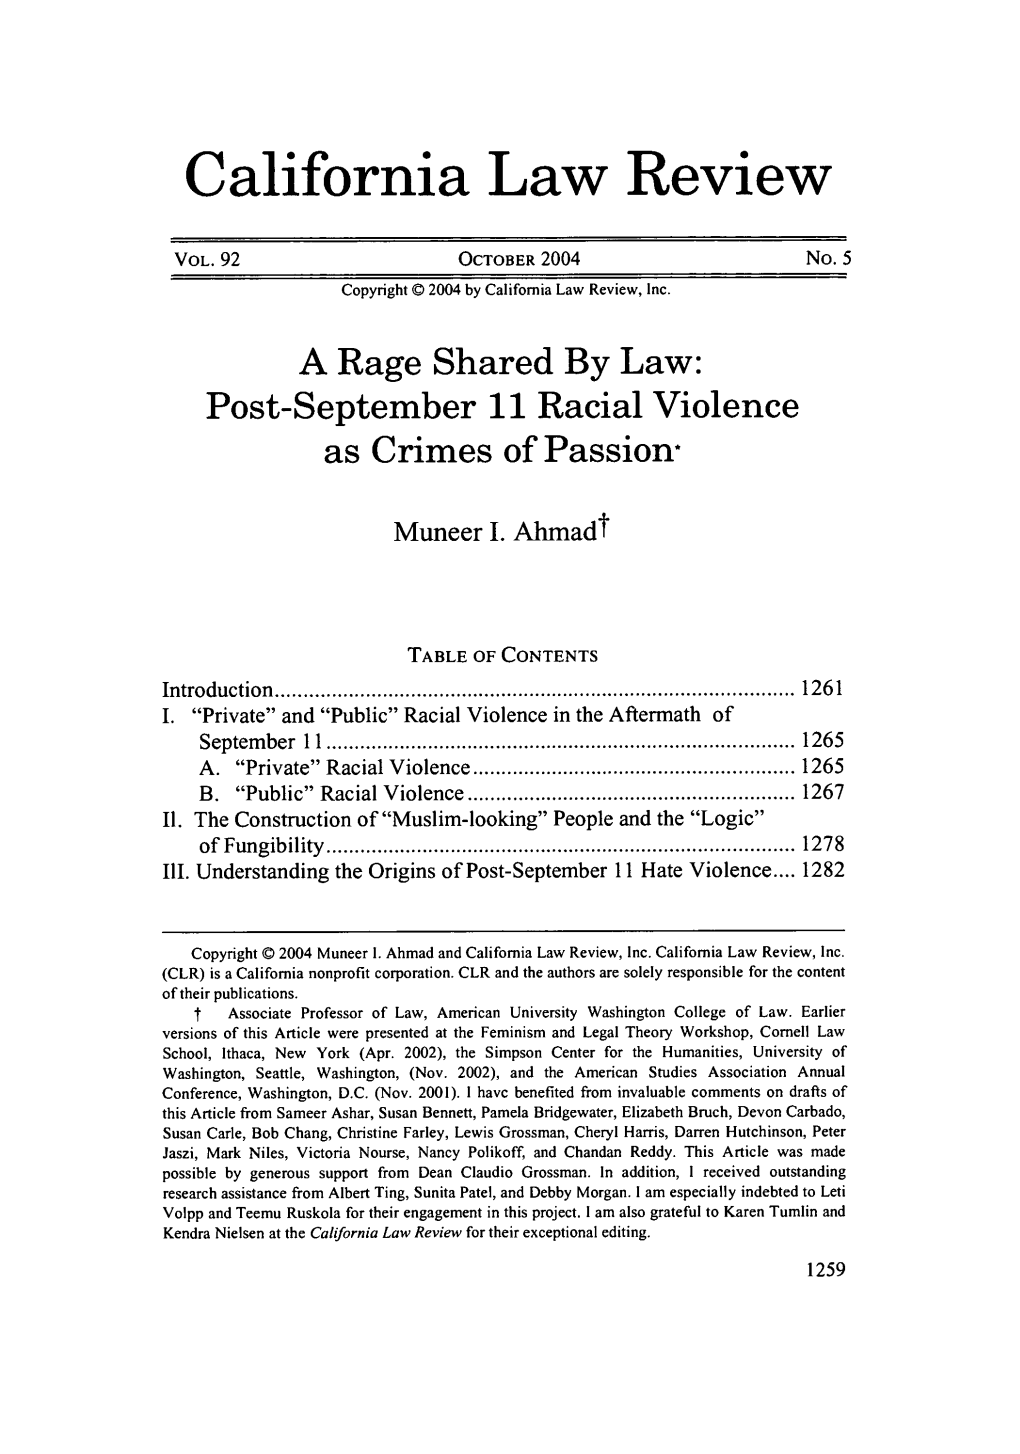 Post-September 11 Racial Violence As Crimes of Passions